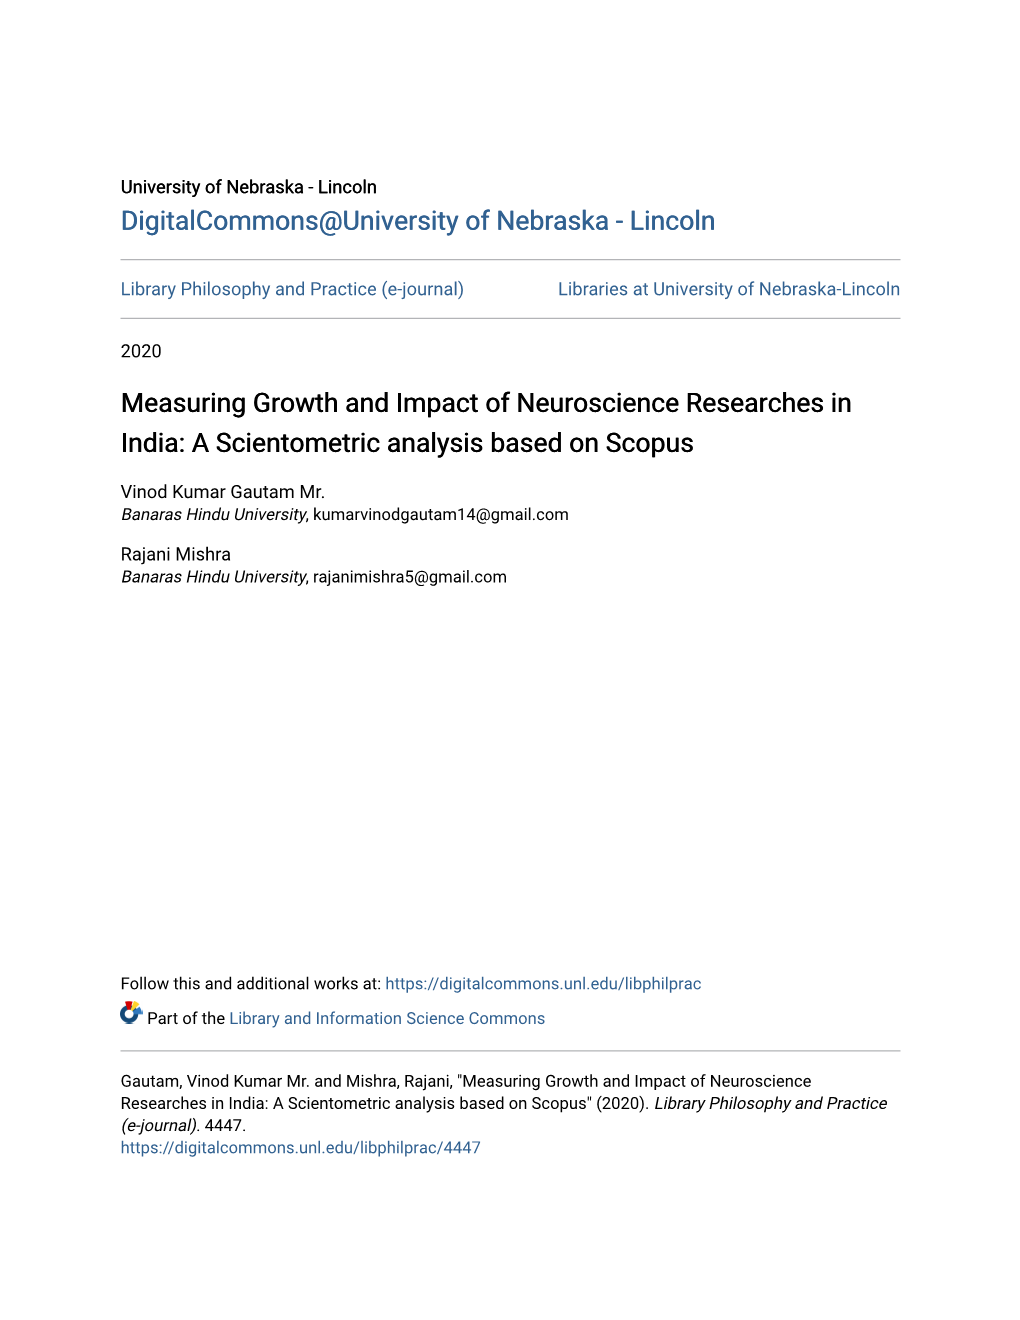 Measuring Growth and Impact of Neuroscience Researches in India: a Scientometric Analysis Based on Scopus